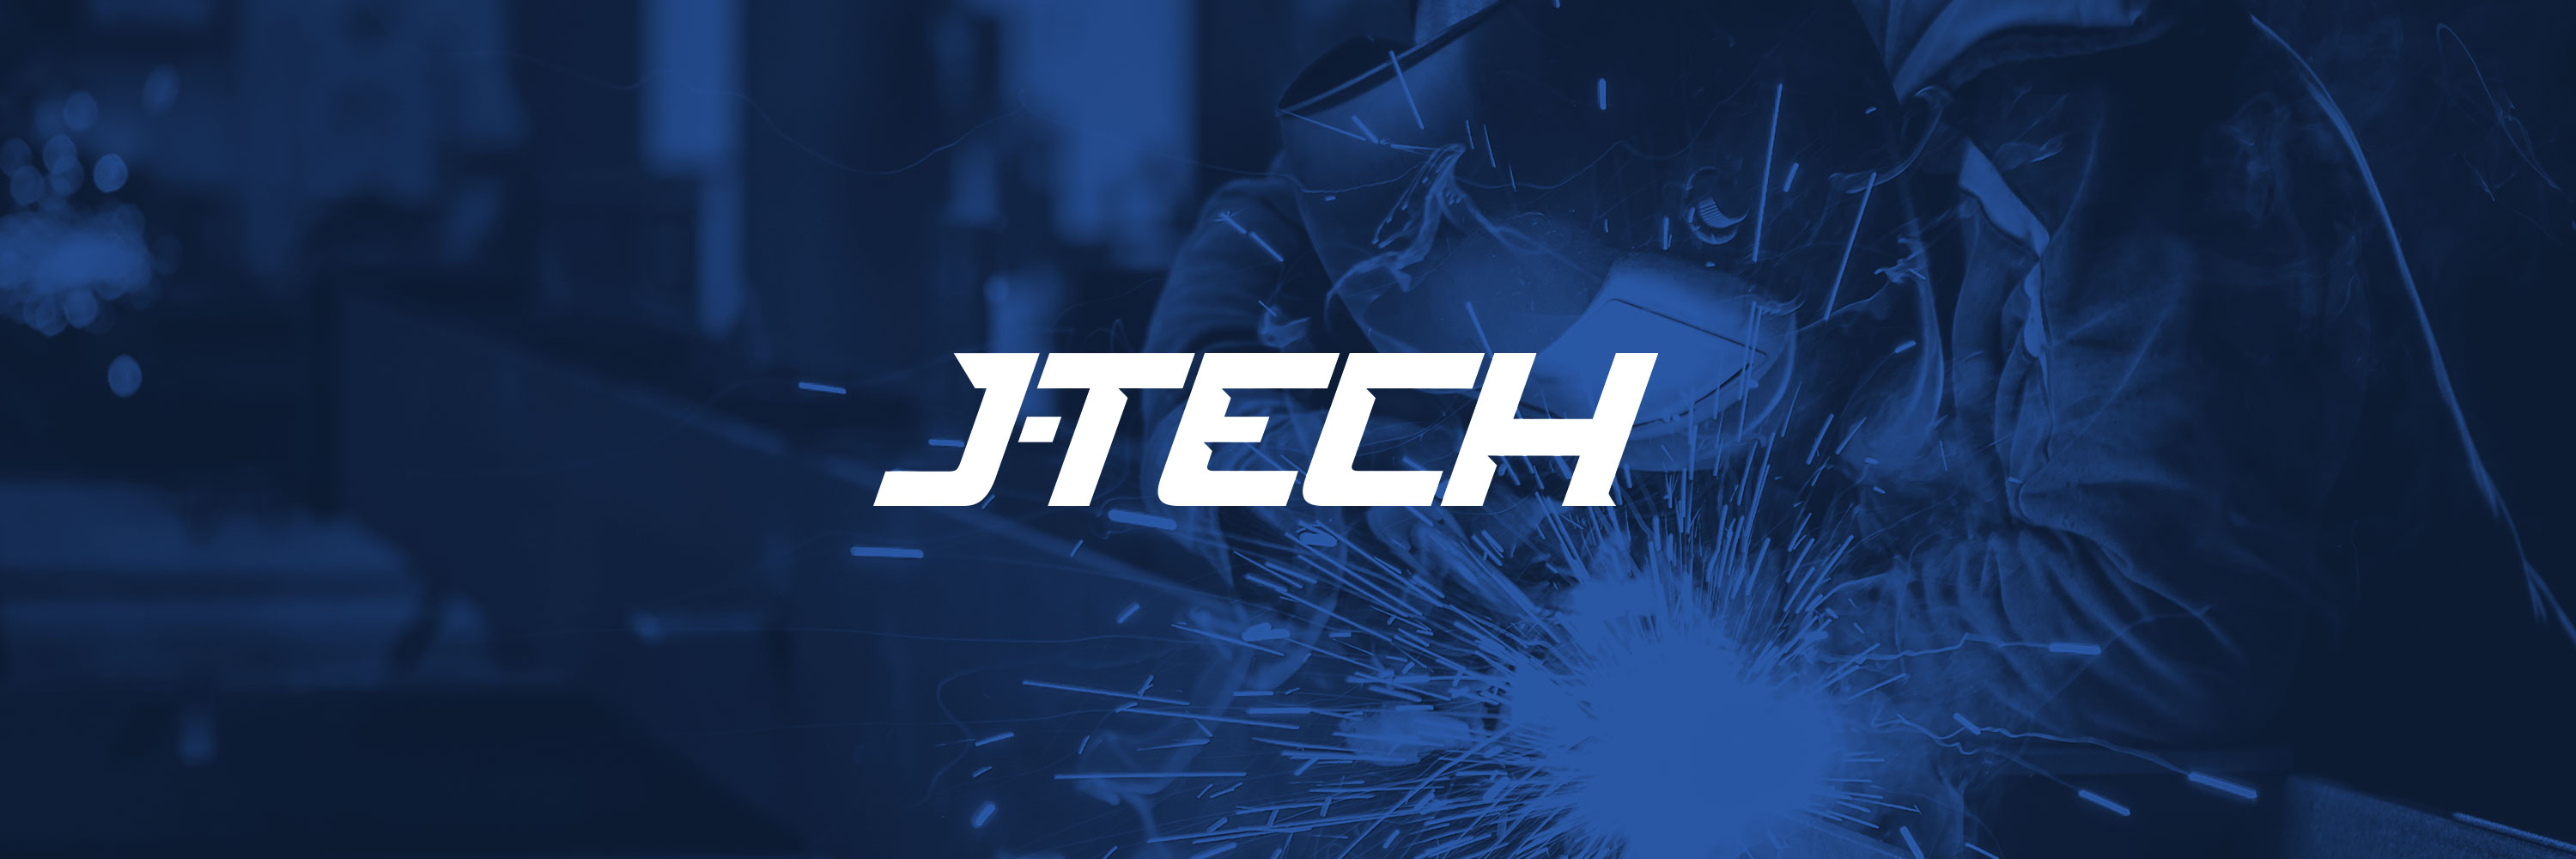 J-Tech B2B Manufacturing and Fabrication Services Branding